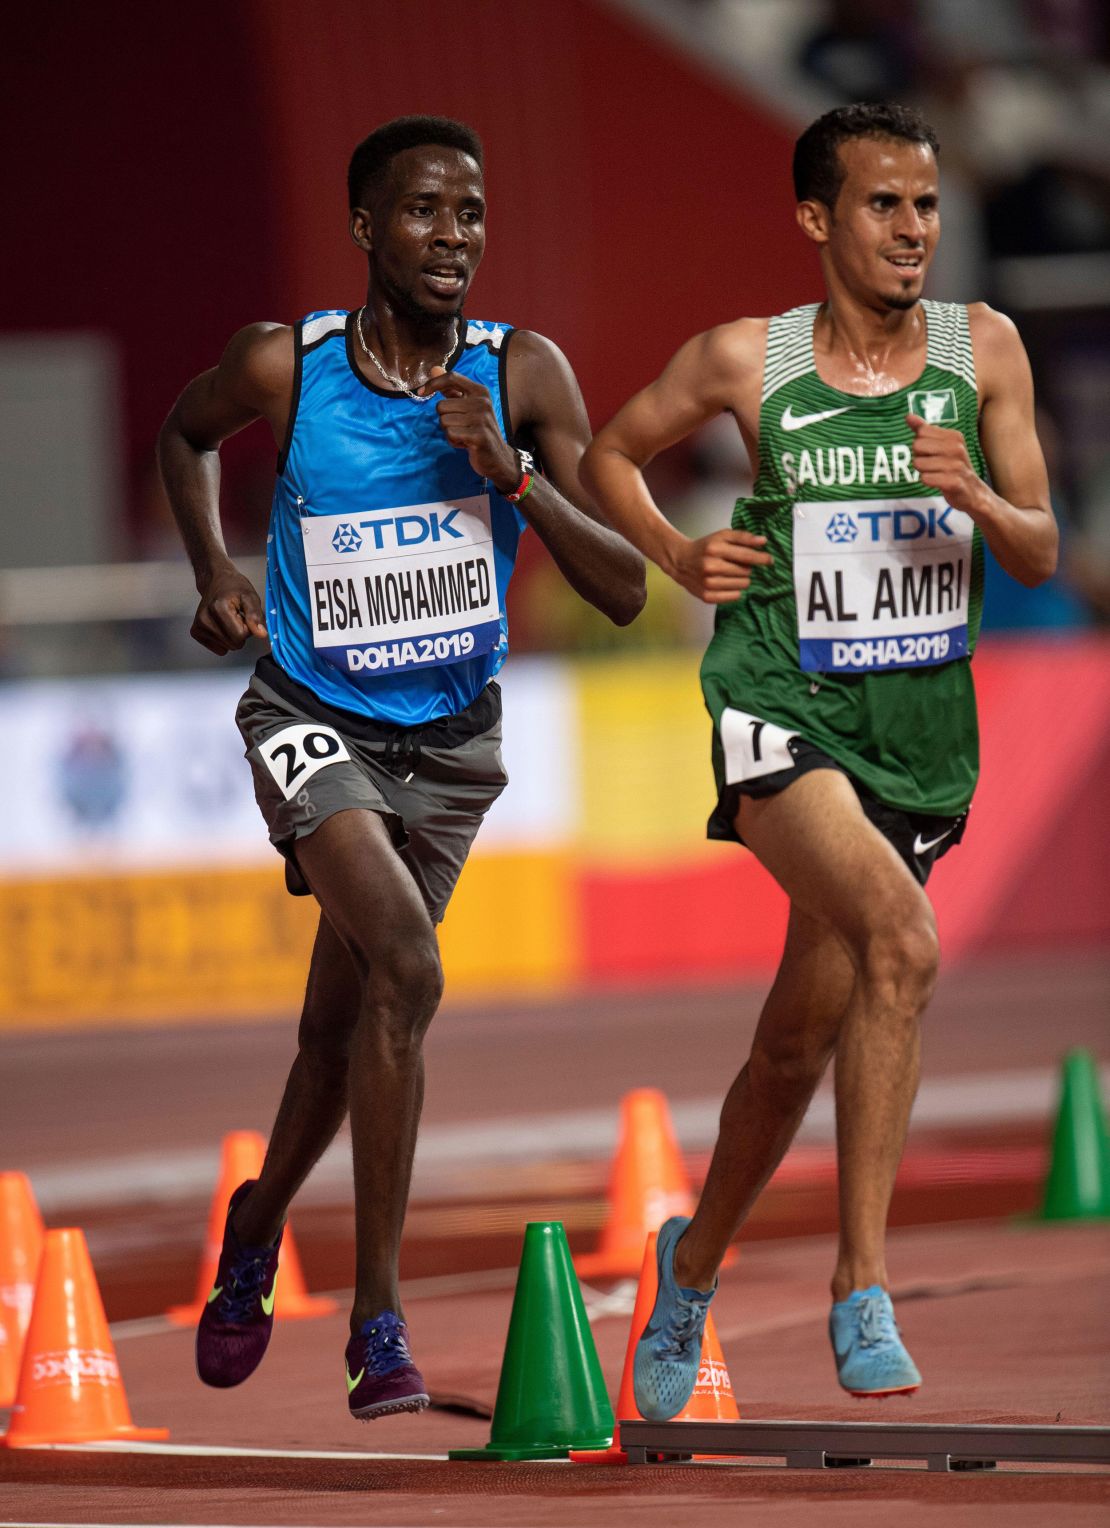 Mohammed competes in the 5000m heats of the World Athletics Championships in Doha